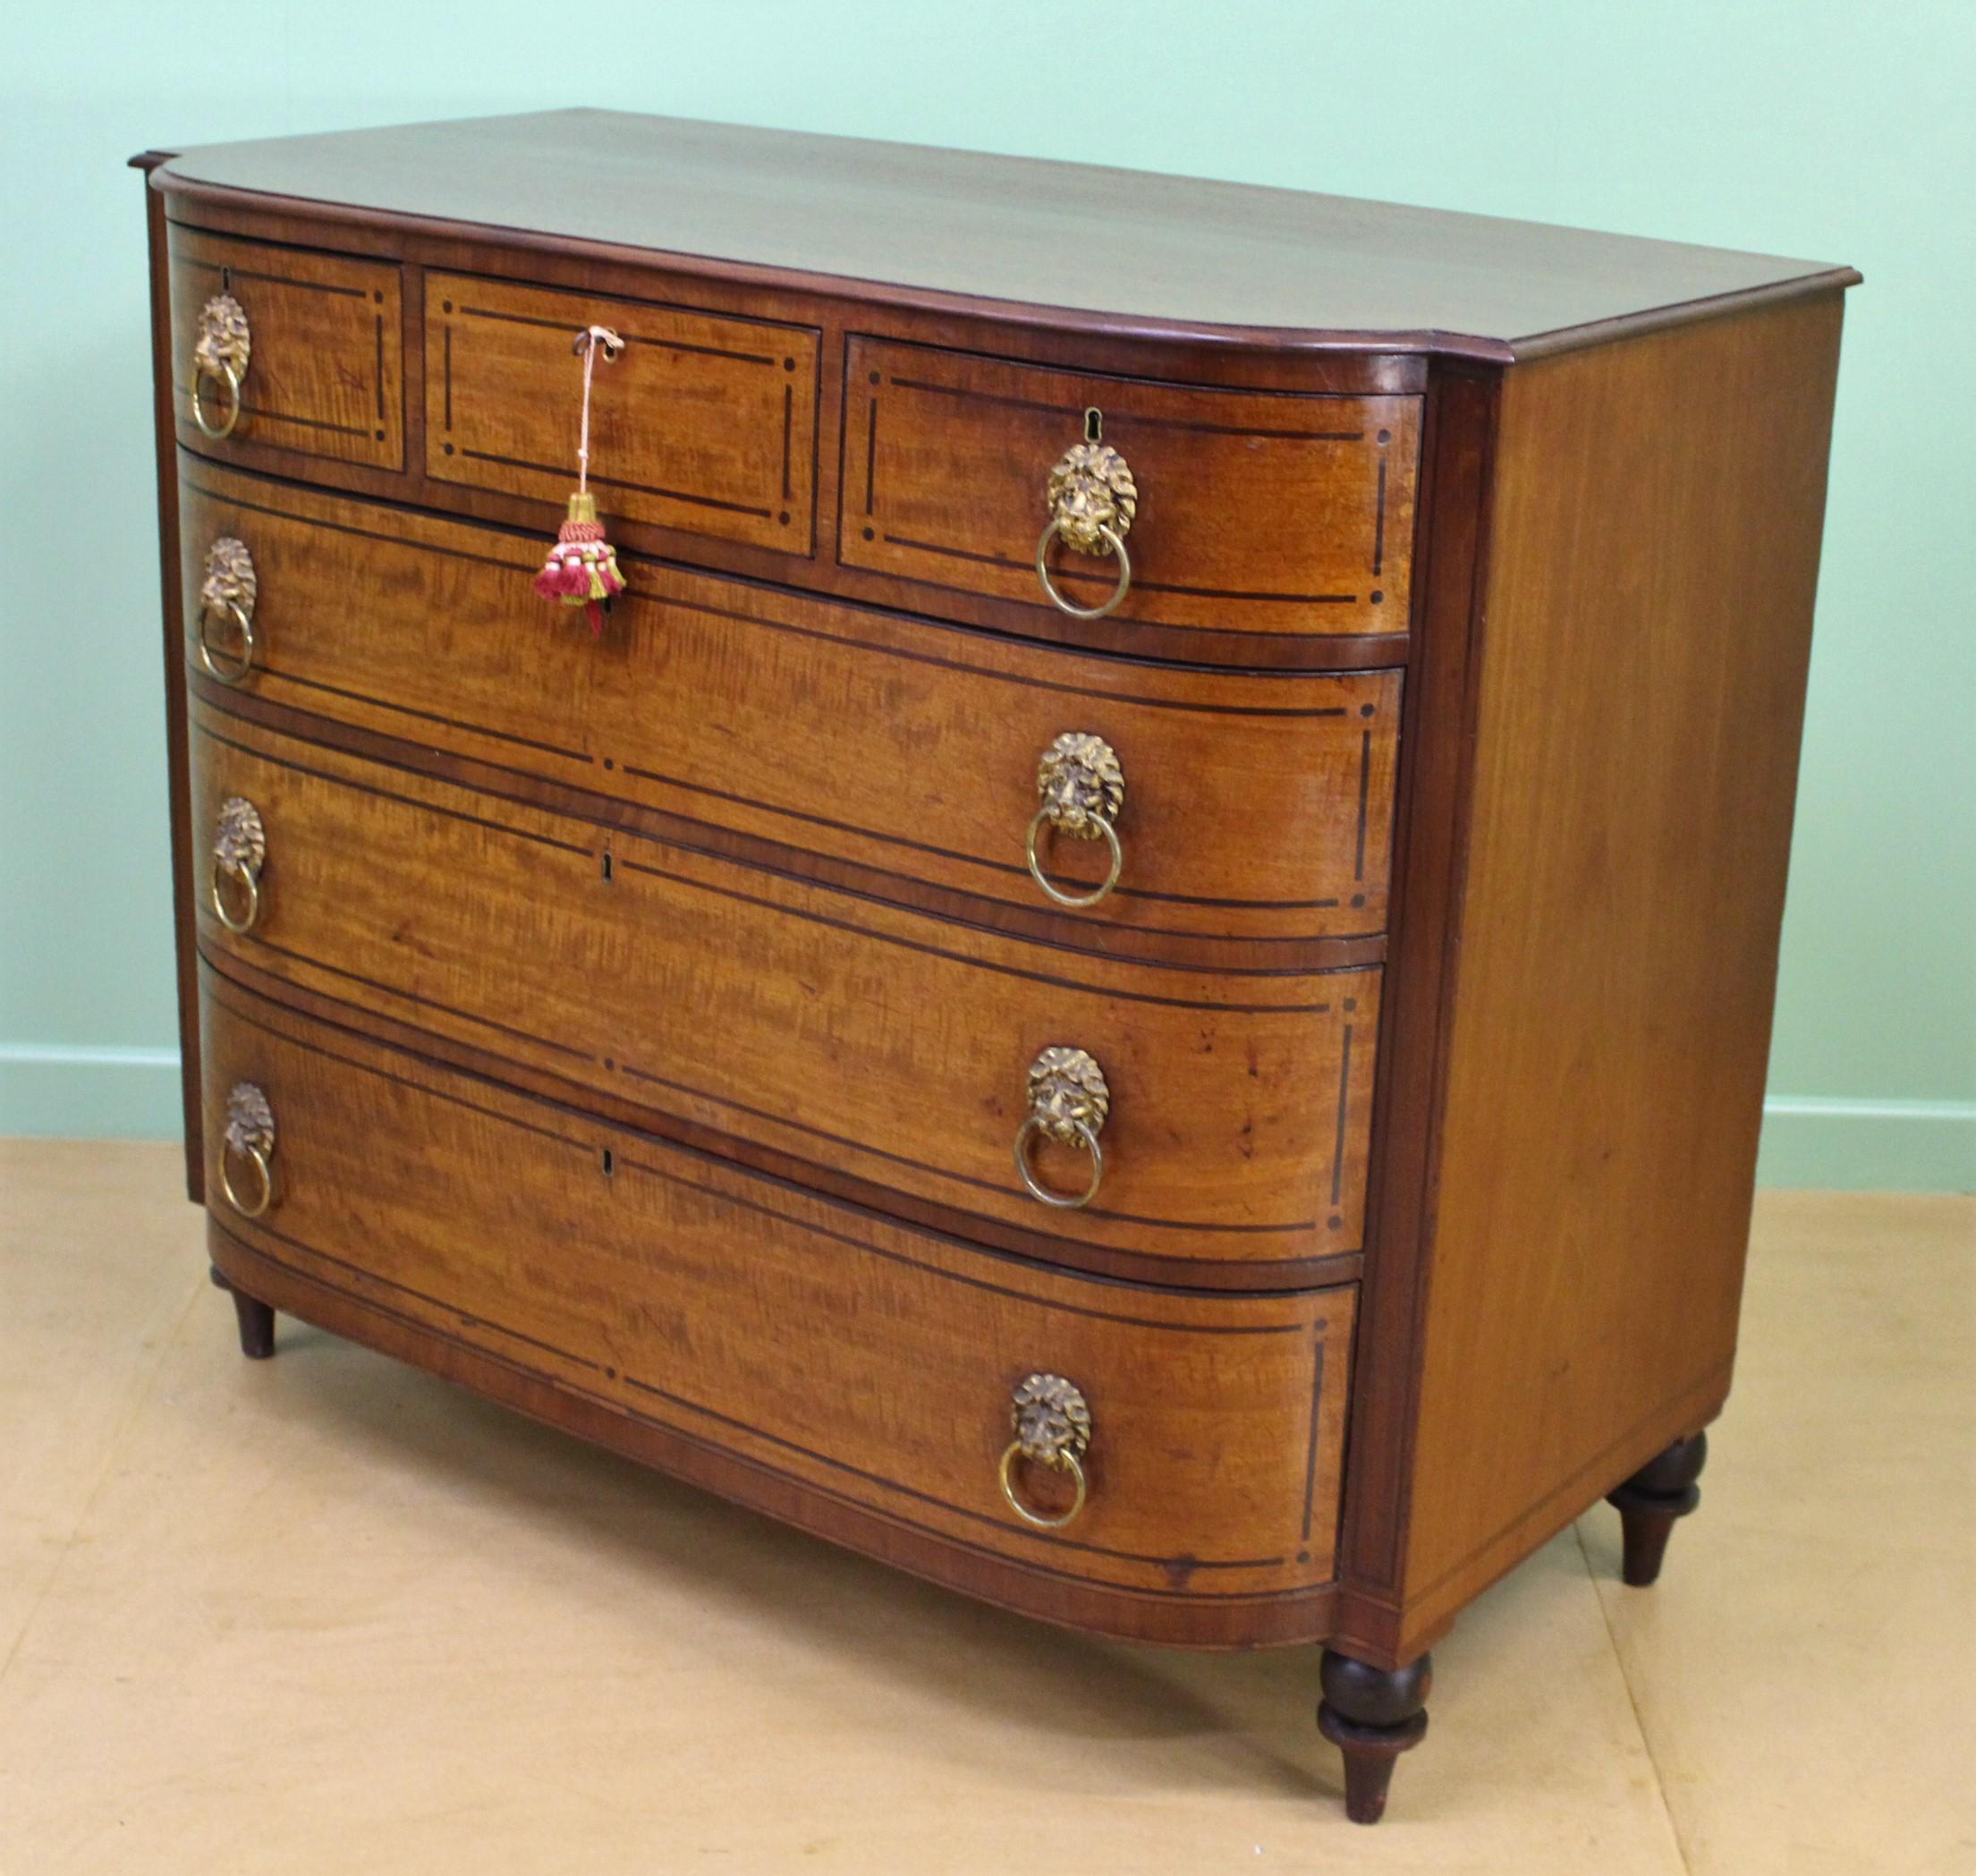 An imposing Regency period mahogany chest of drawers. Of excellent construction in solid mahogany, mahogany veneers and with oak drawer linings. Of generous proportions and of D-fronted form and with ebonized inlaid detailing throughout. With an